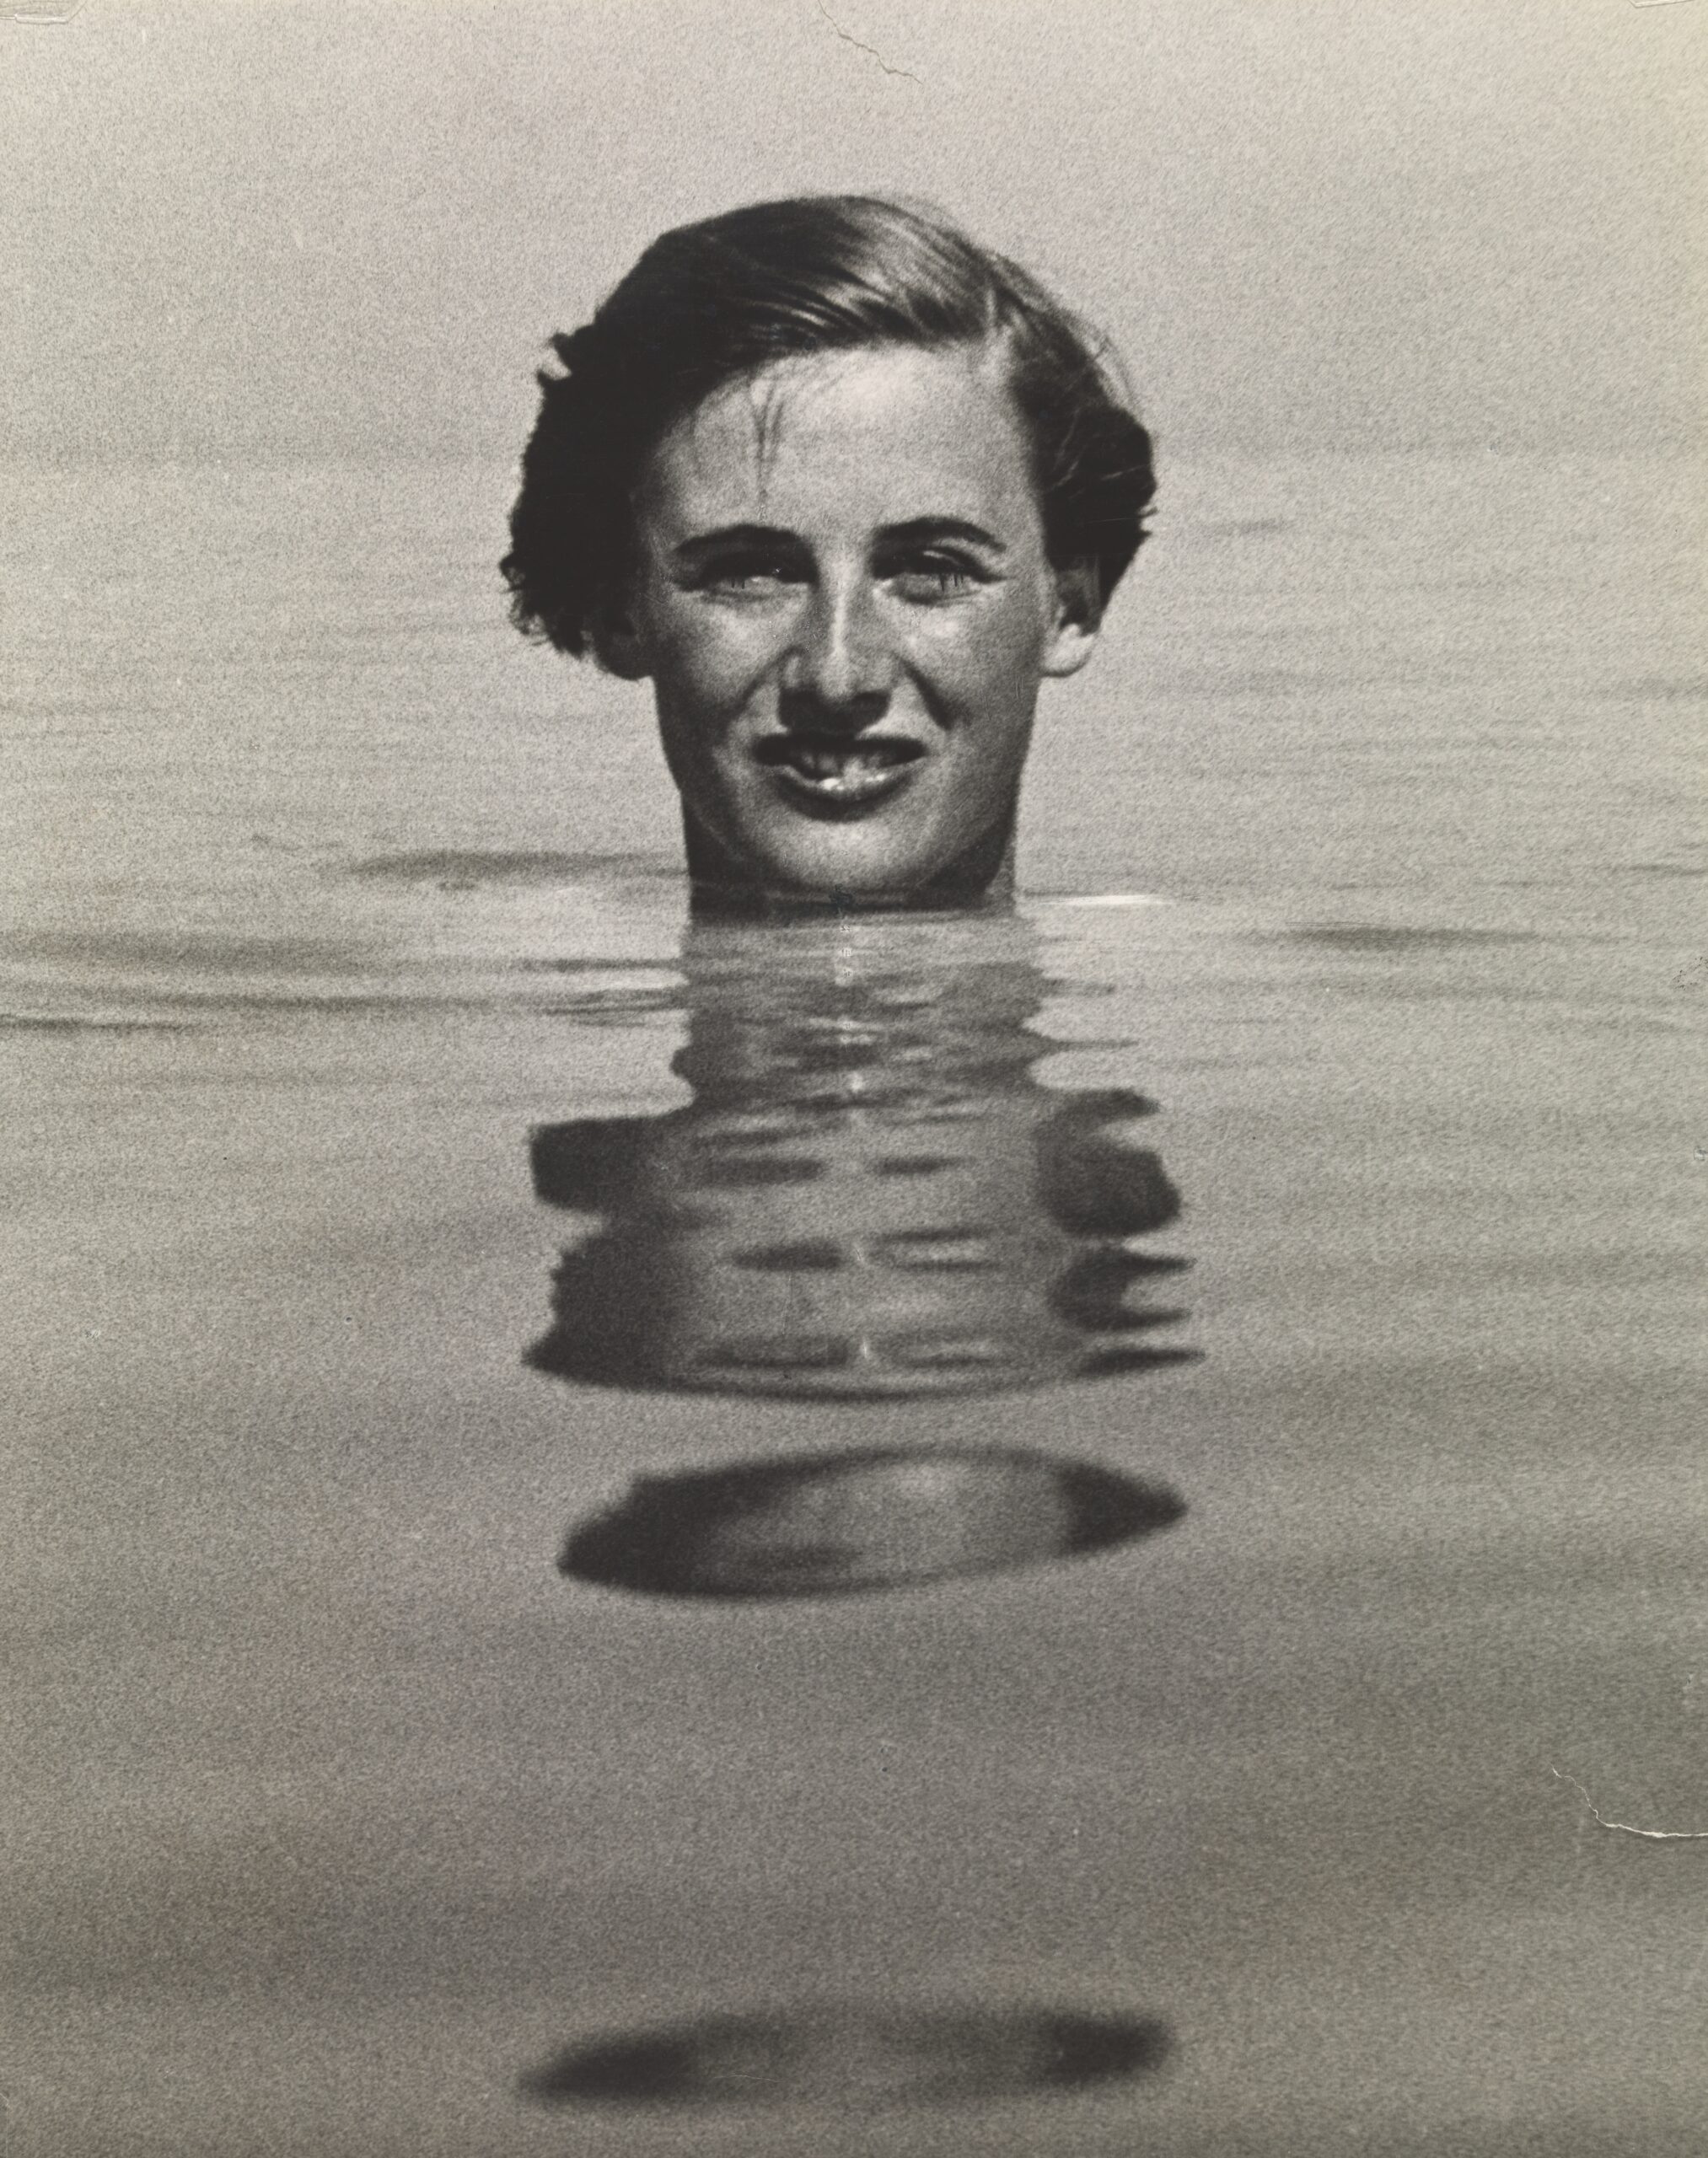 Bill Brandt, Woman Swimming. Tate. Accepted by HM Government in lieu of inheritance tax from the Estate of Barbara Lloyd and allocated to Tate 2009. © The Estate of Bill Brandt